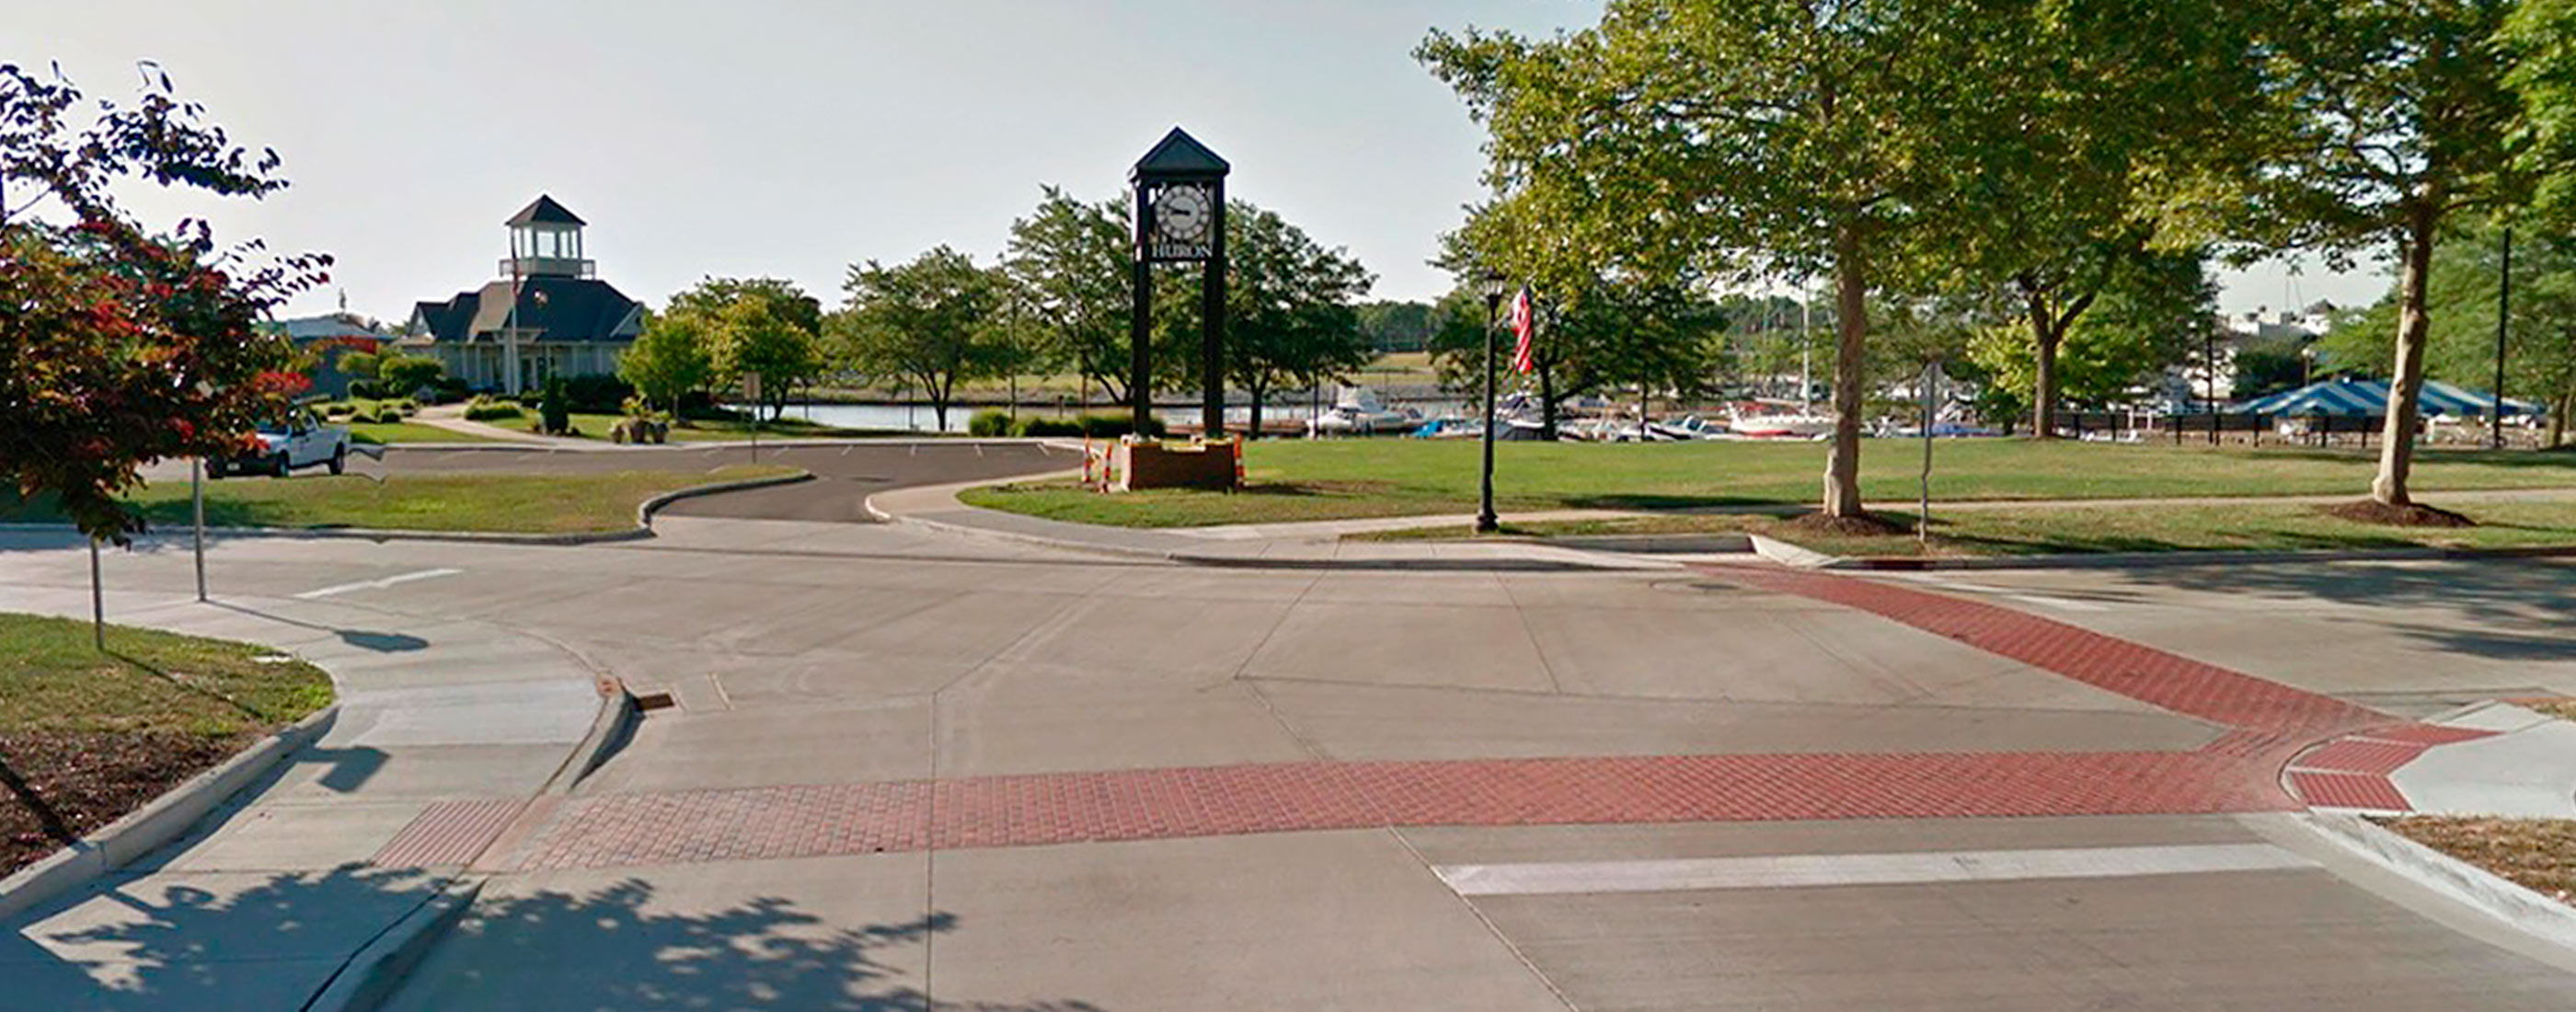 Huron, Ohio’s updated streetscape by OHM Advisors includes wider sidewalks and aesthetic street lighting.